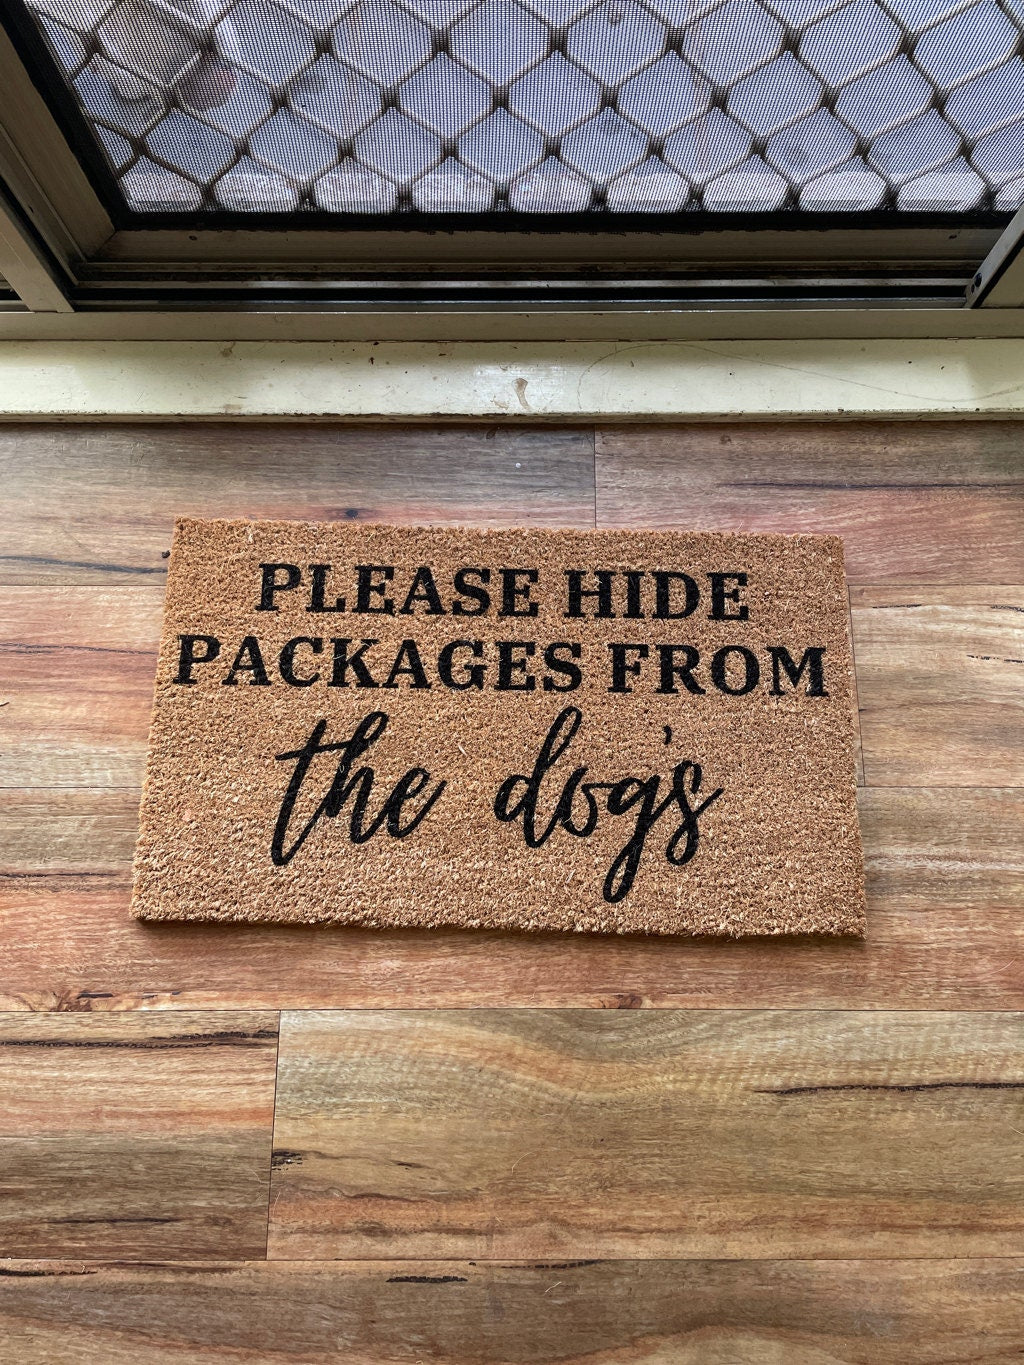 Please hide packages from husband or..